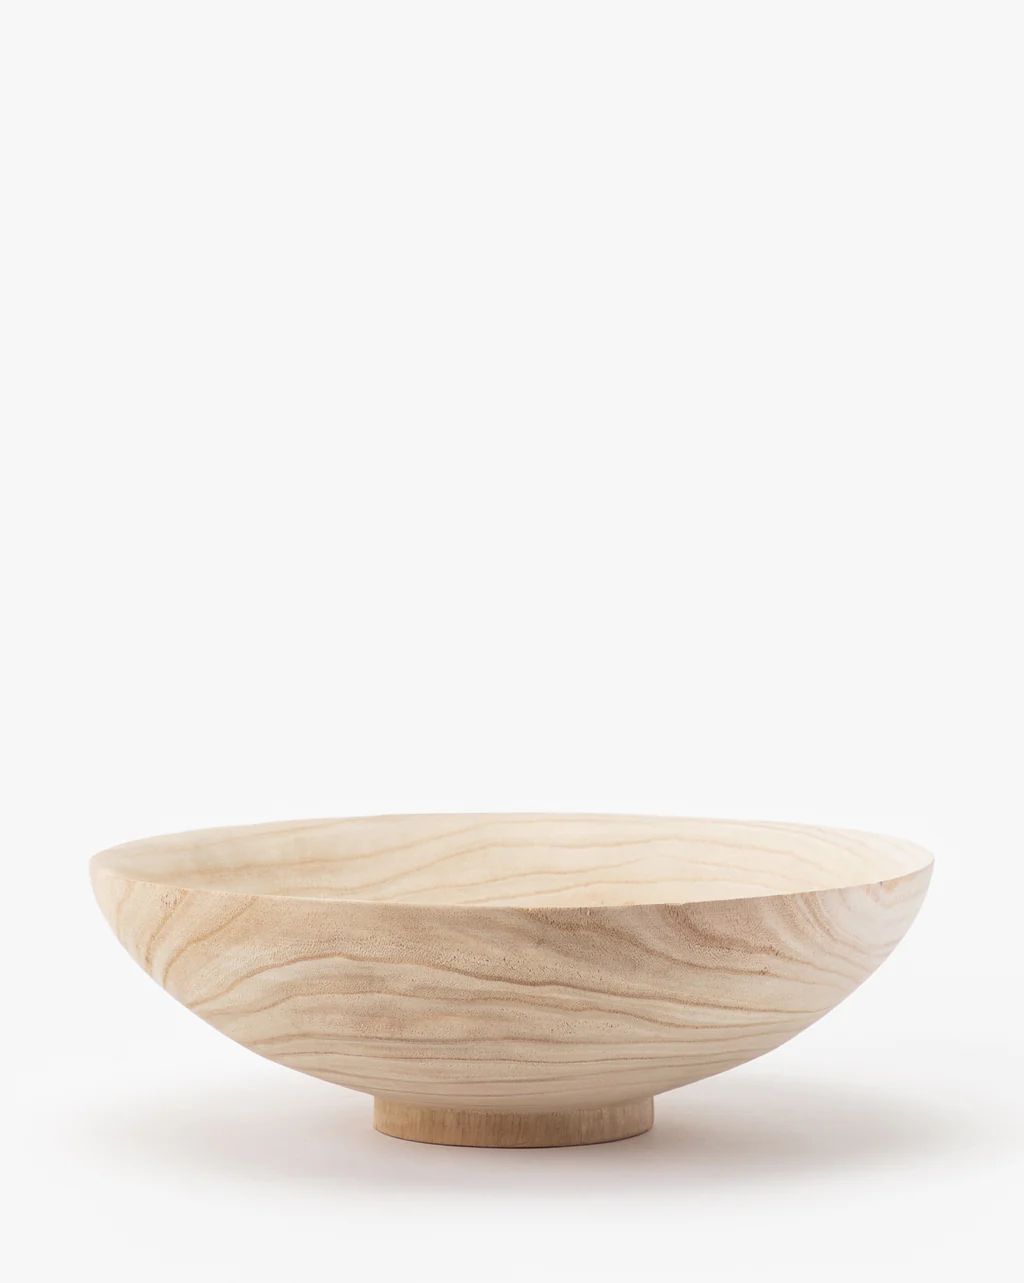 Hannes Footed Bowl | McGee & Co.